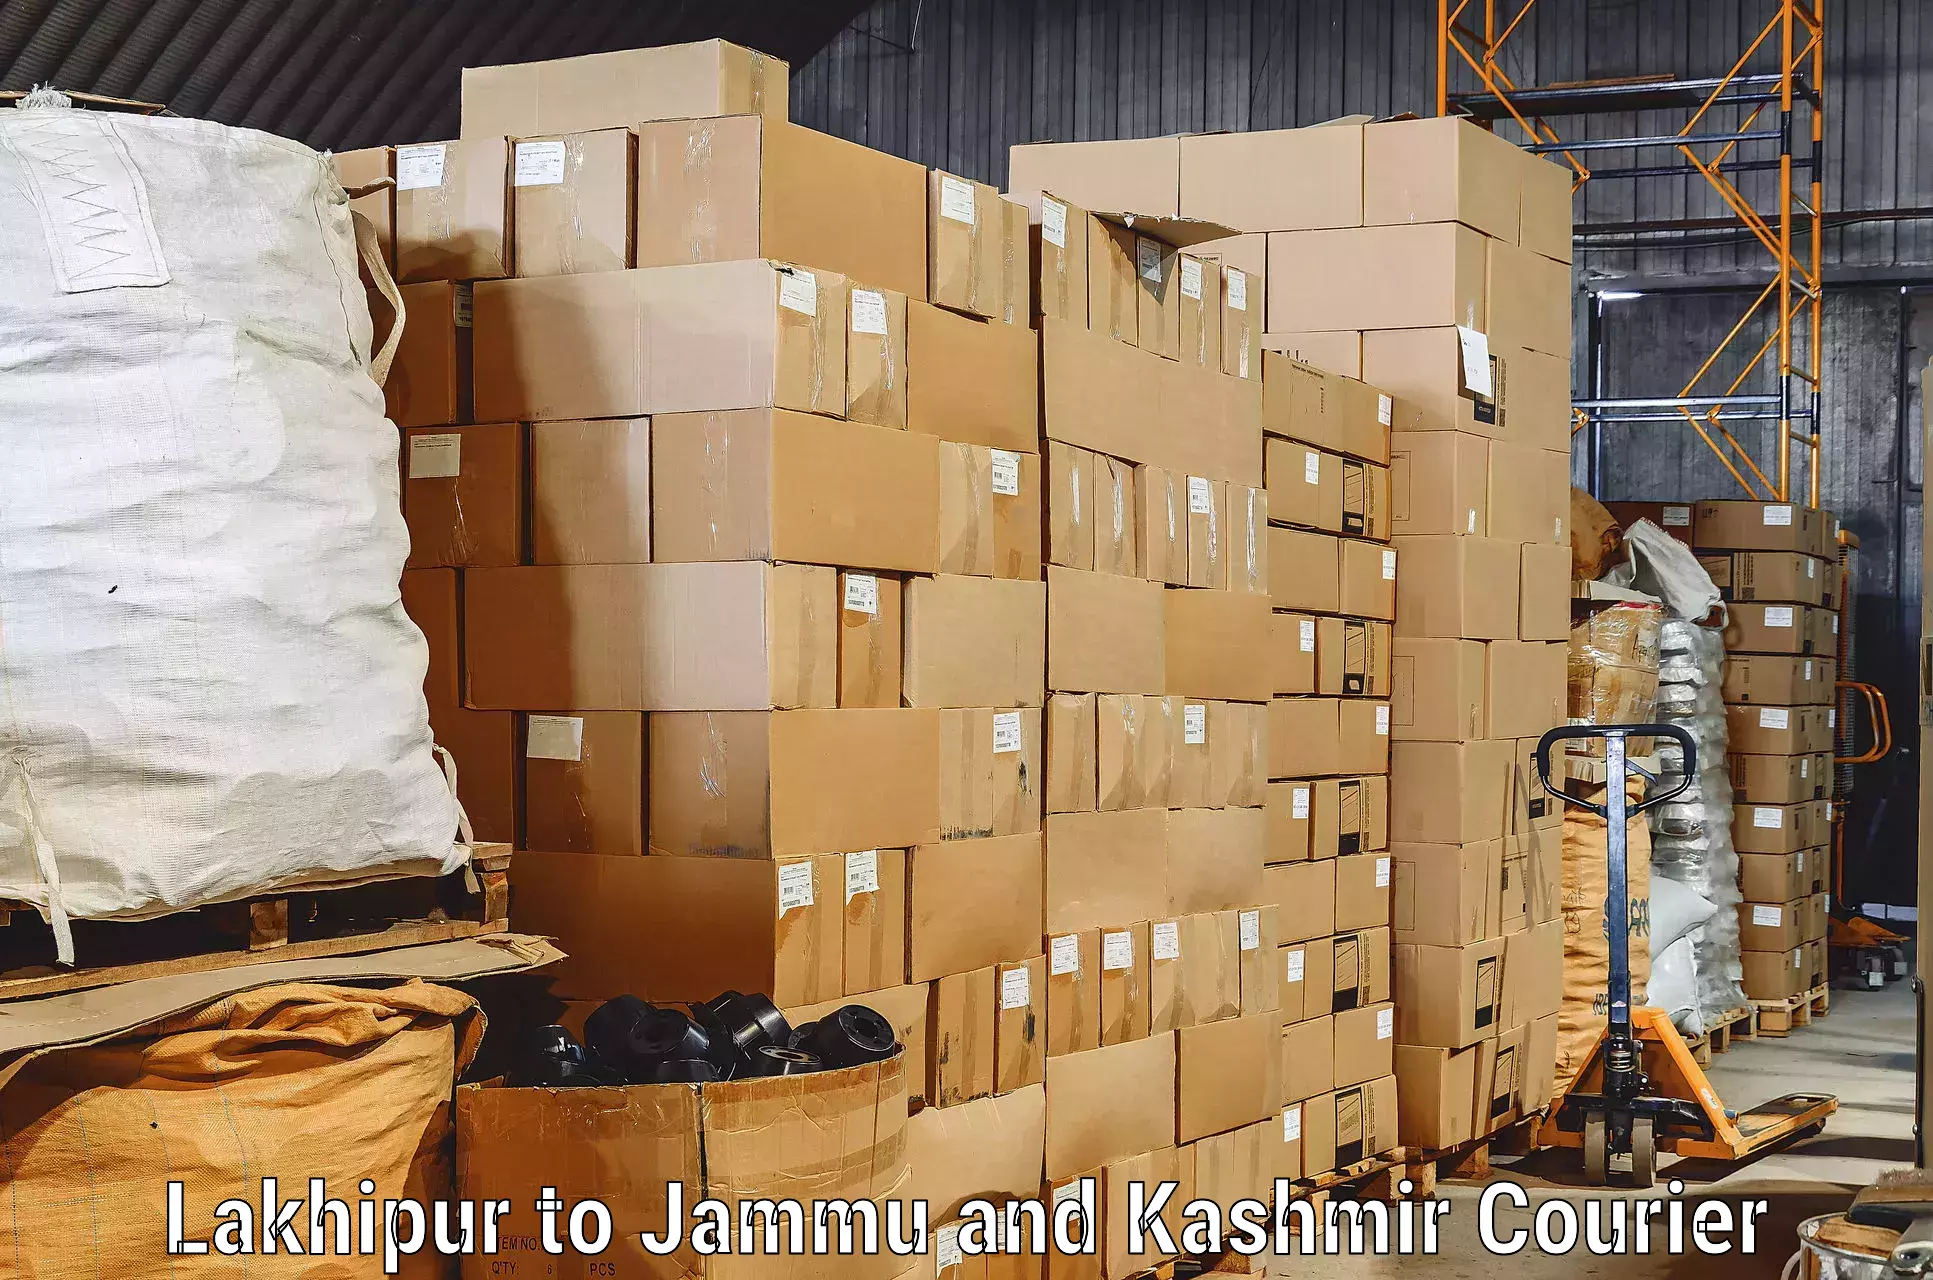 Furniture delivery service Lakhipur to Budgam